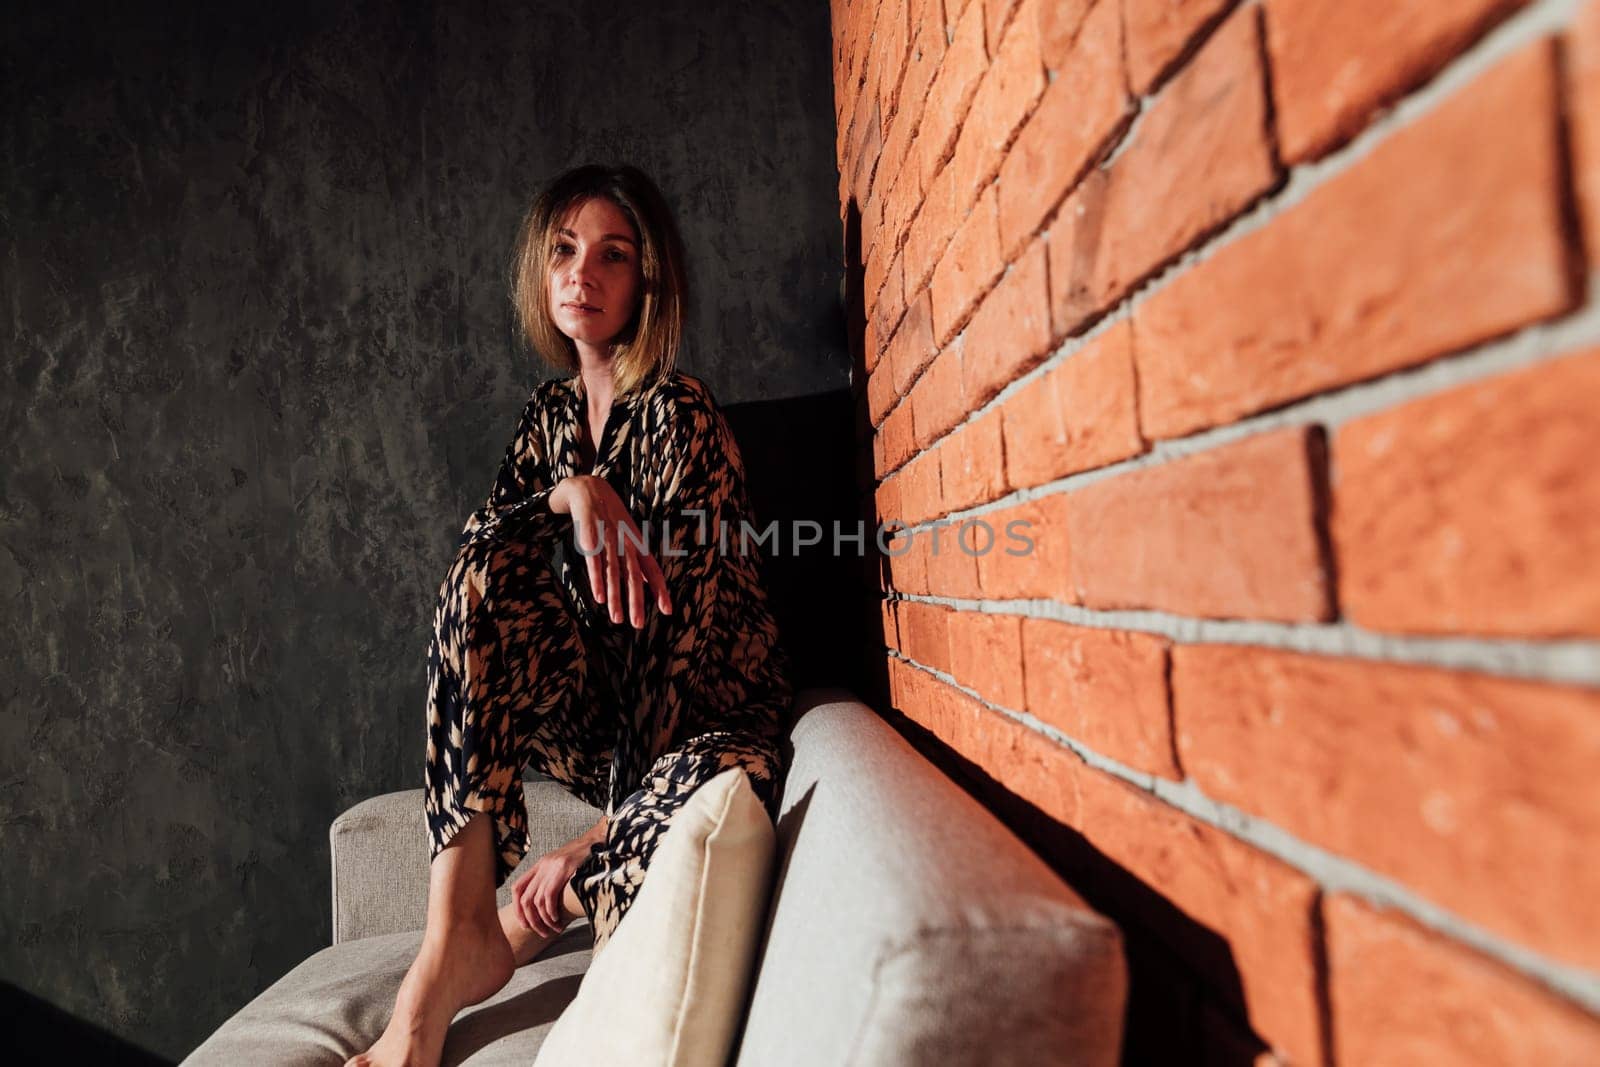 a blonde woman sitting on couch in a room against a red brick wall